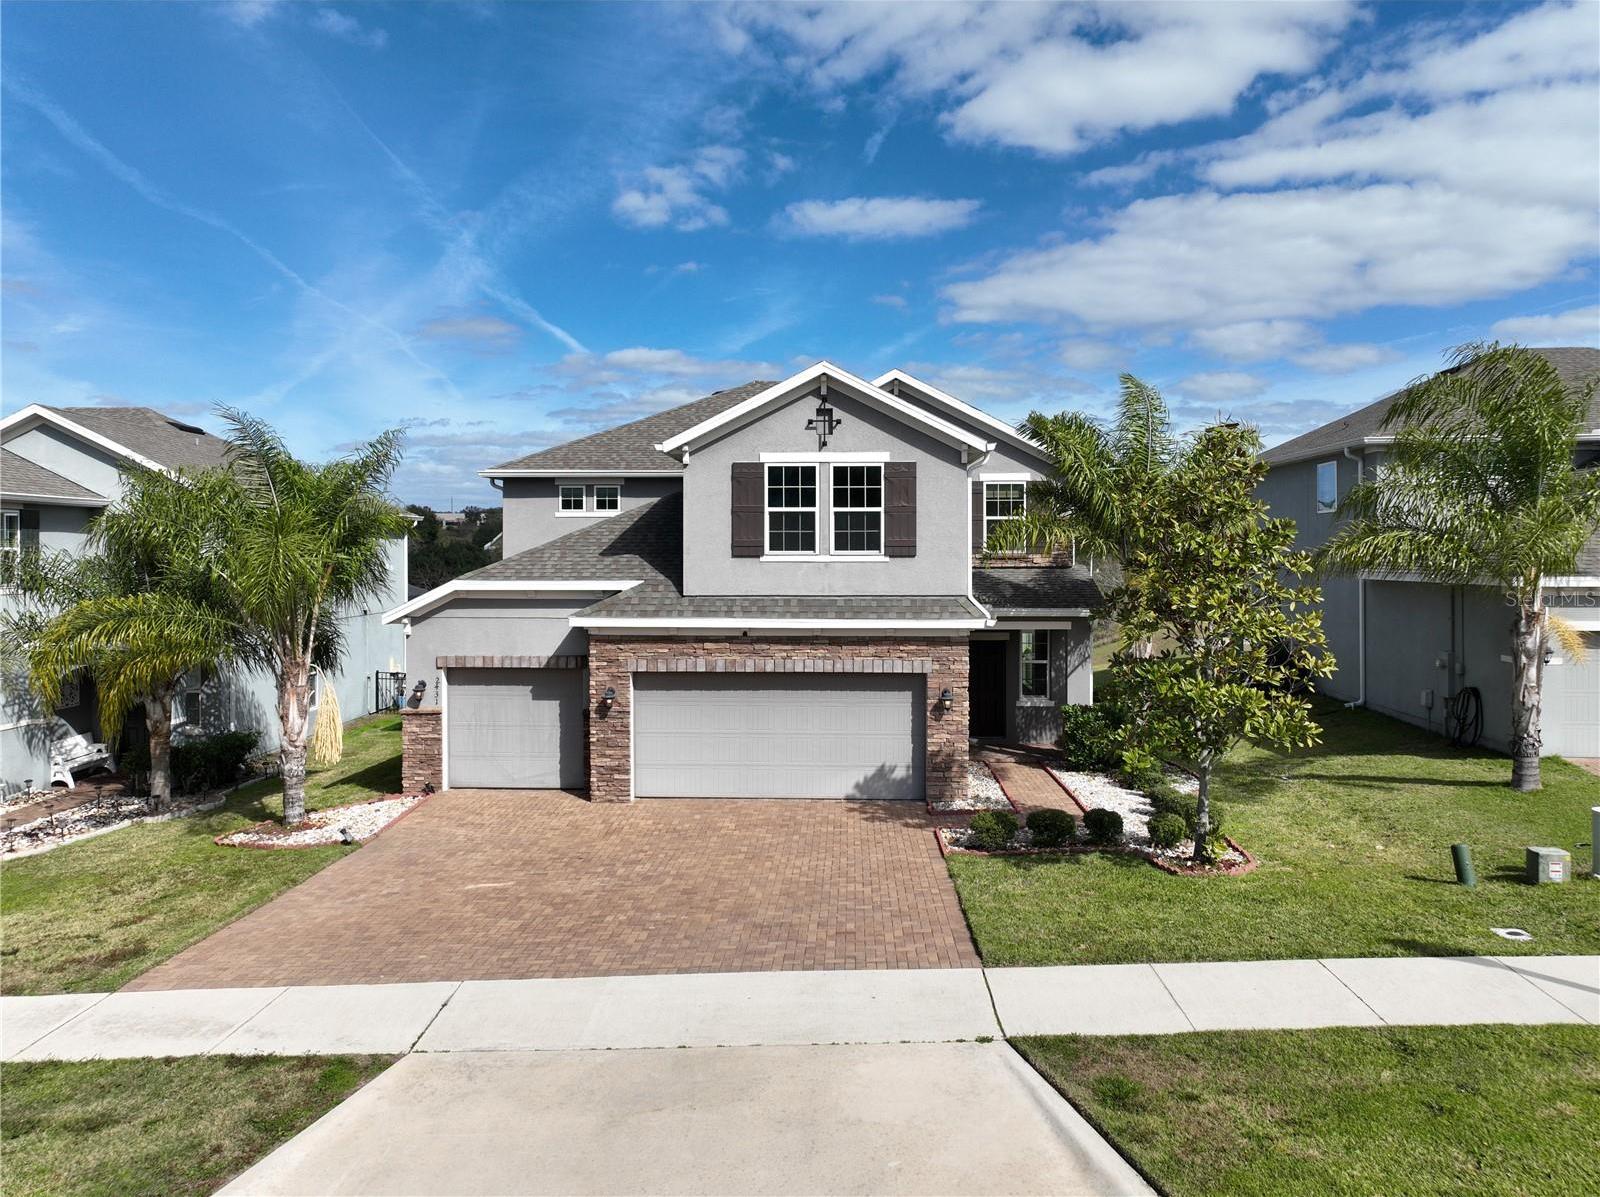 Photo one of 2431 Hastings Blvd Clermont FL 34711 | MLS O6178450